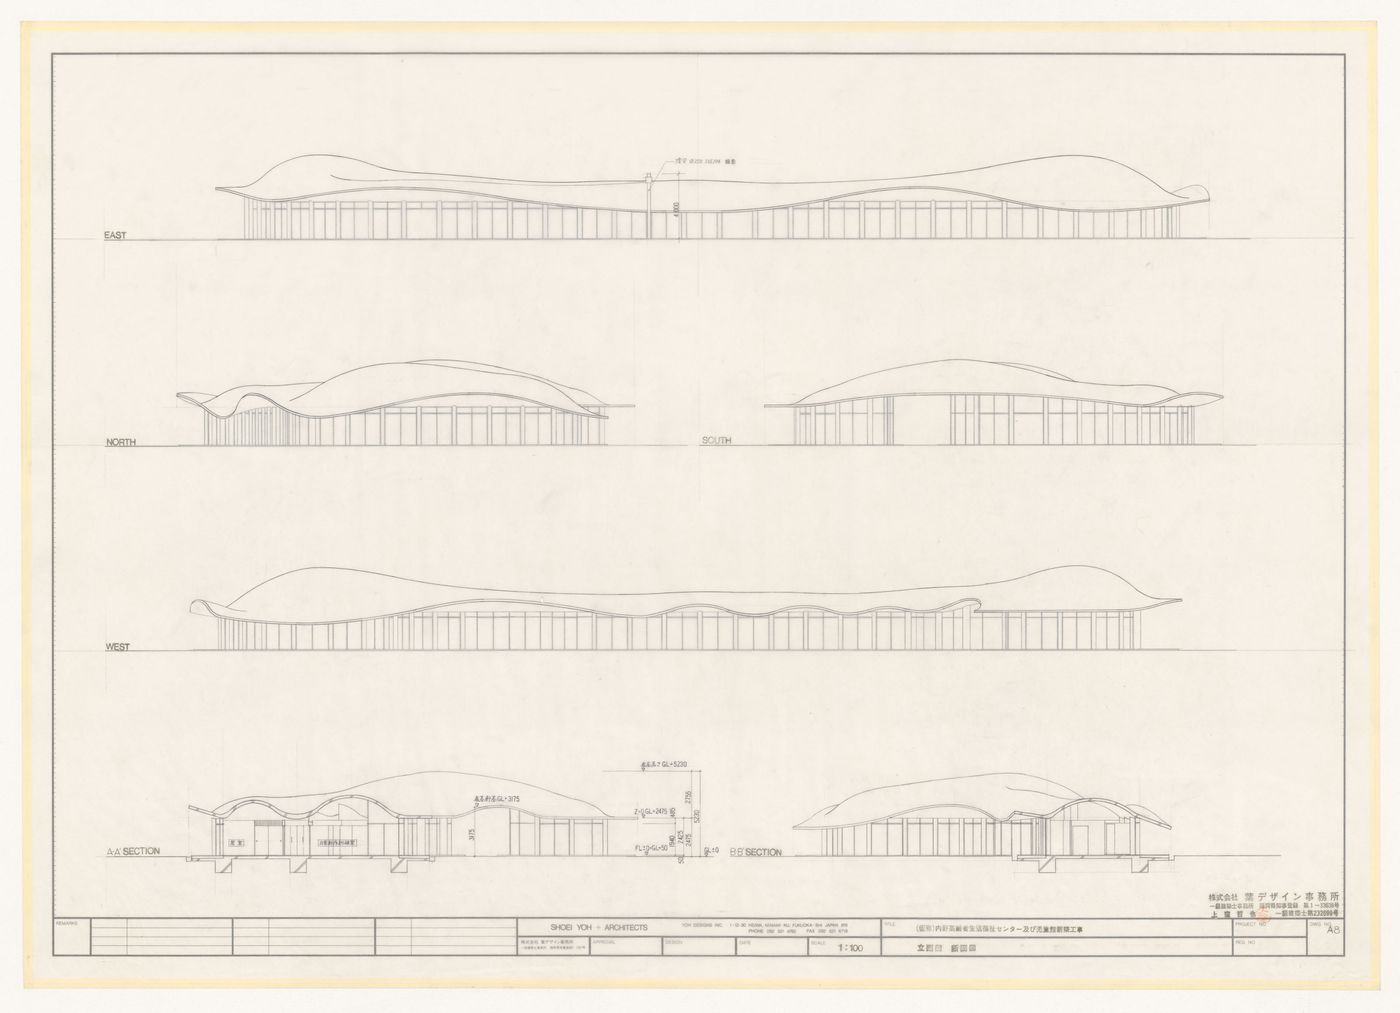 Elevations and sections for Uchino Community Center for Seniors and Children, Fukuoka Prefecture, Japan